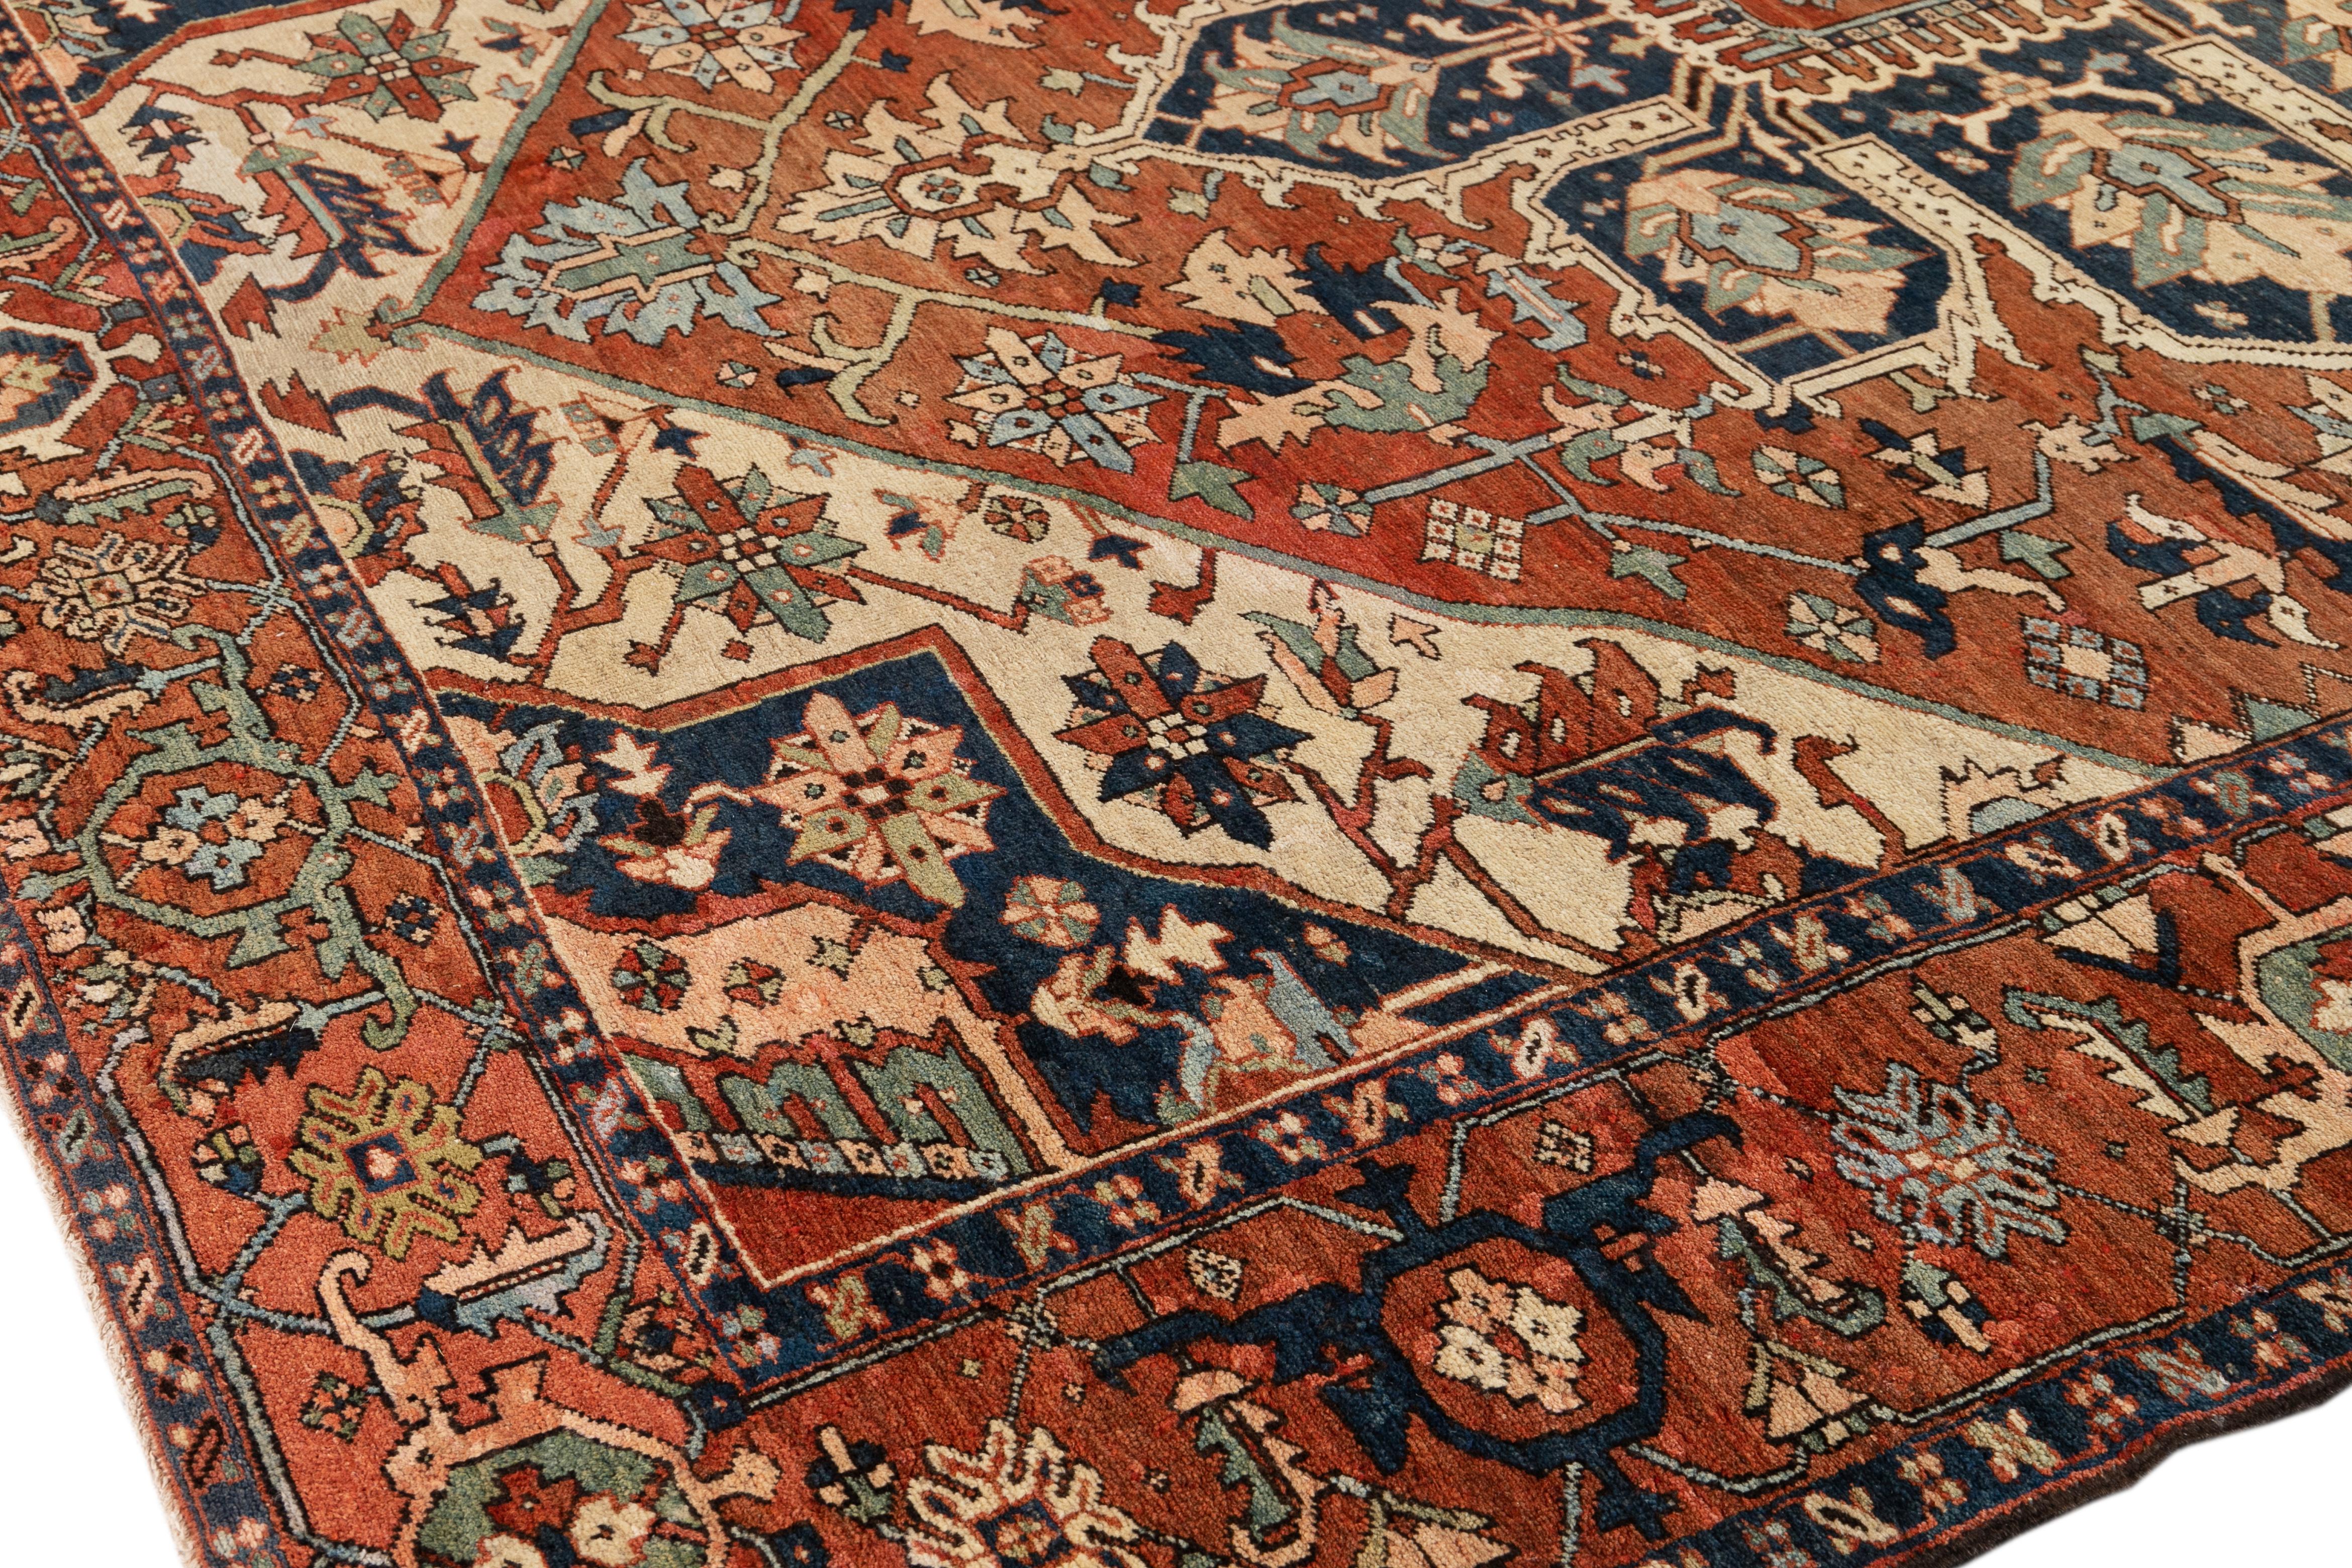 Handmade Antique Persian Serapi Medallion Wool Rug In Orange- Rust Color  In Good Condition For Sale In Norwalk, CT